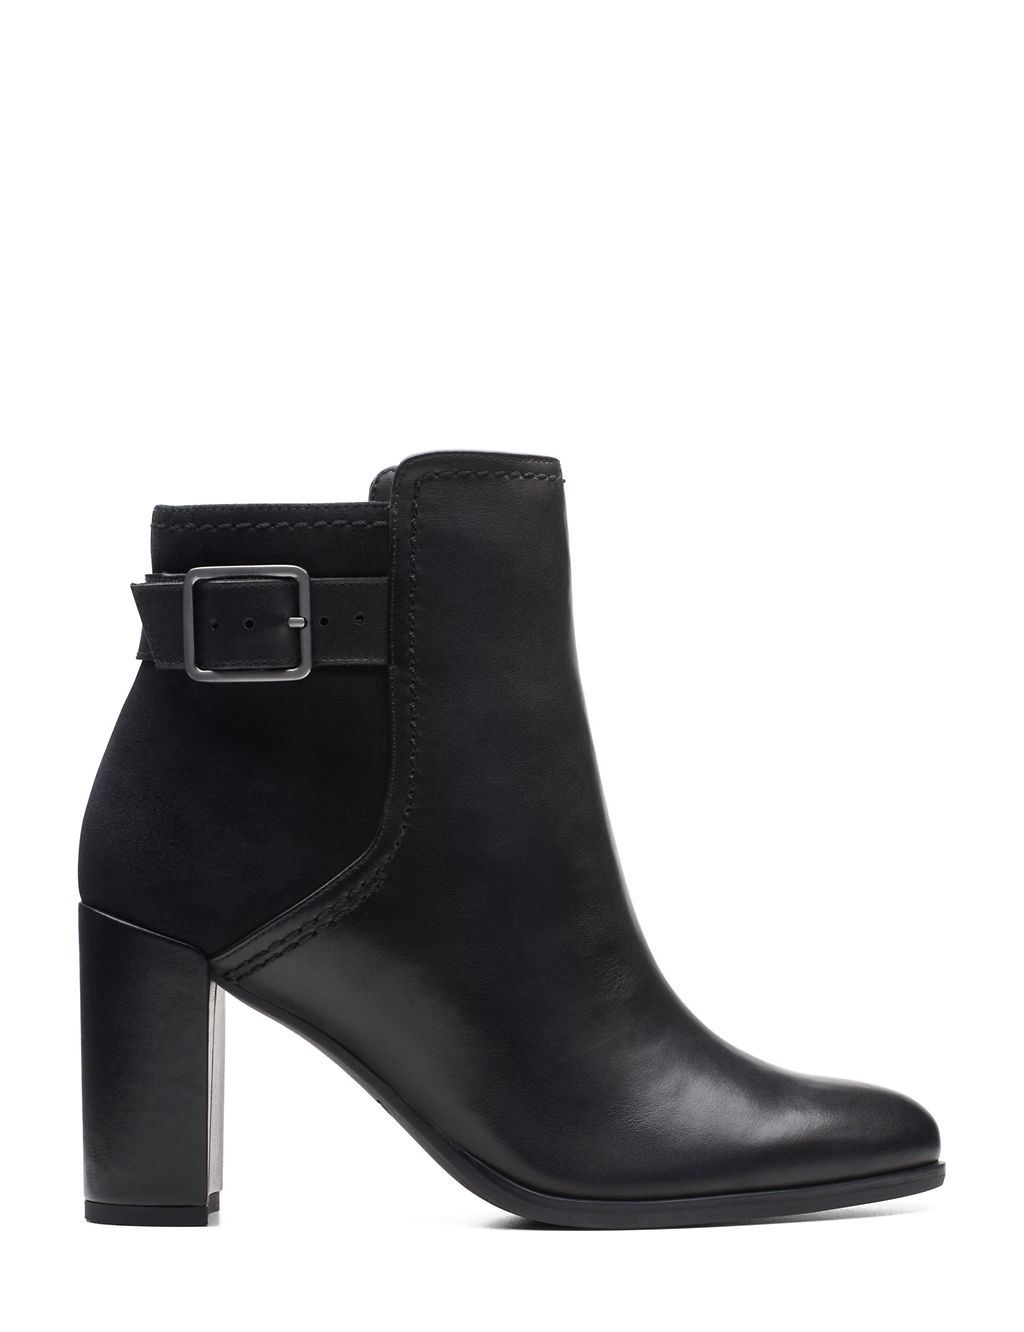 Leather Buckle Block Heel Ankle Boots 3 of 7